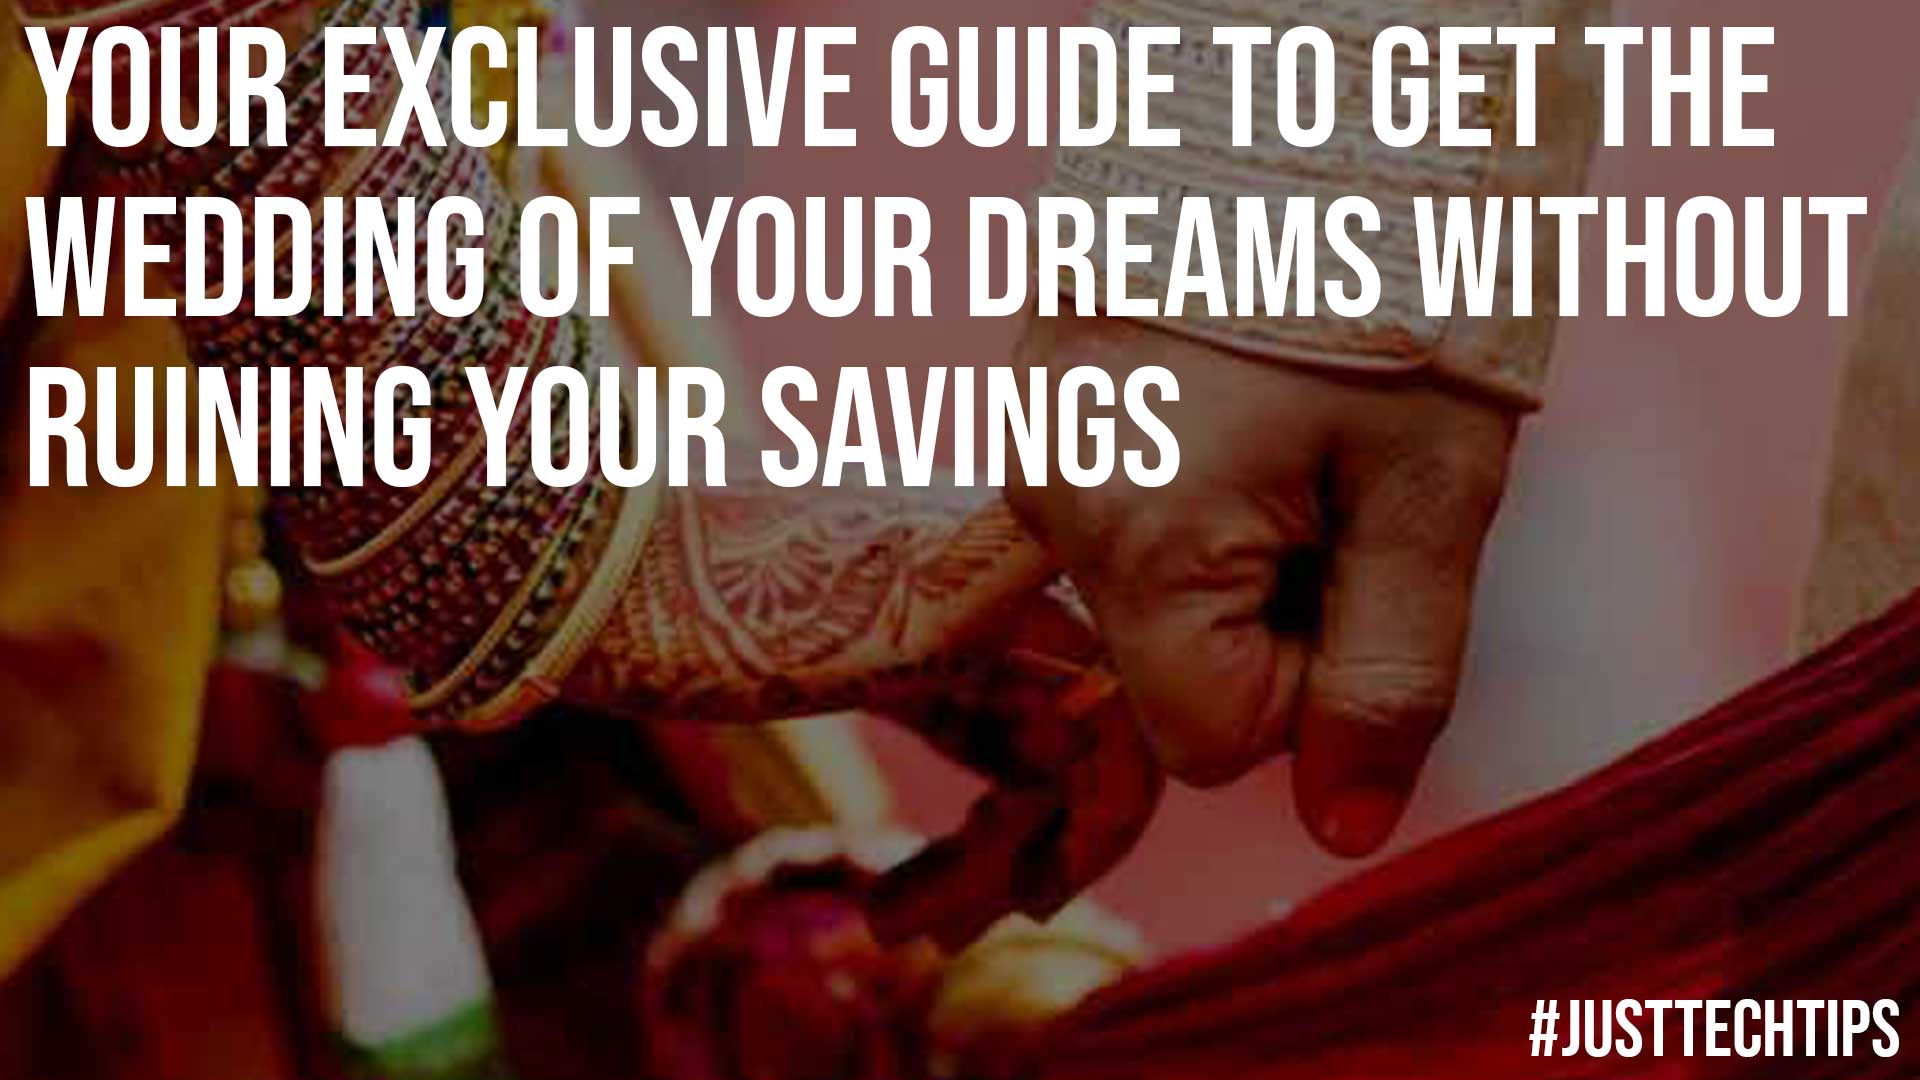 Your Exclusive Guide To Get The Wedding Of Your Dreams Without Ruining Your Savings